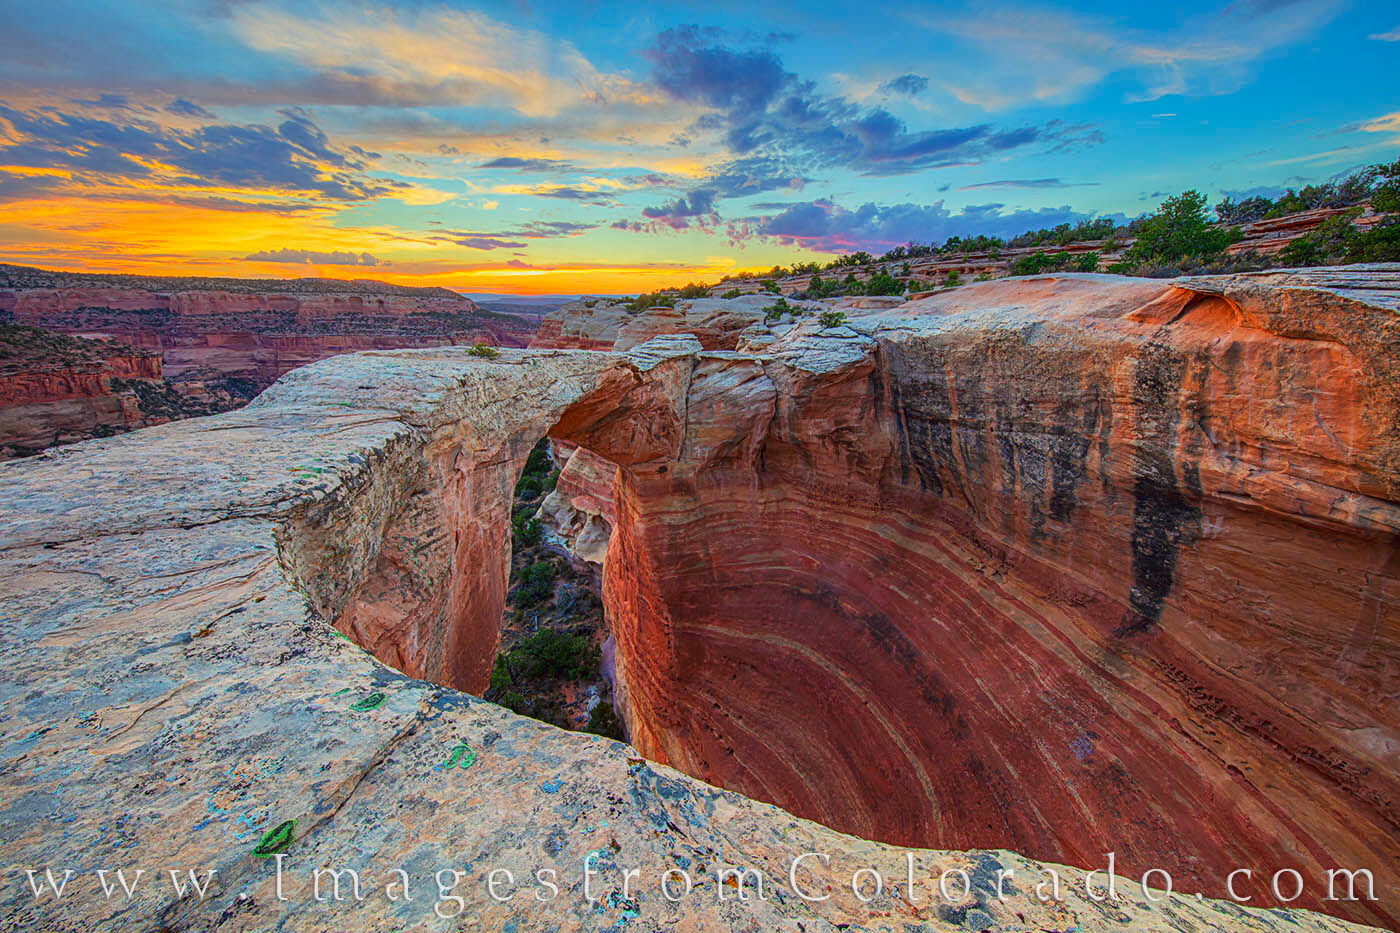 Sunset at Rattlesnake Arch is an amazing sight. From this perspective overlooking Rattlesnake Canyon, the sandstone bridge makes...